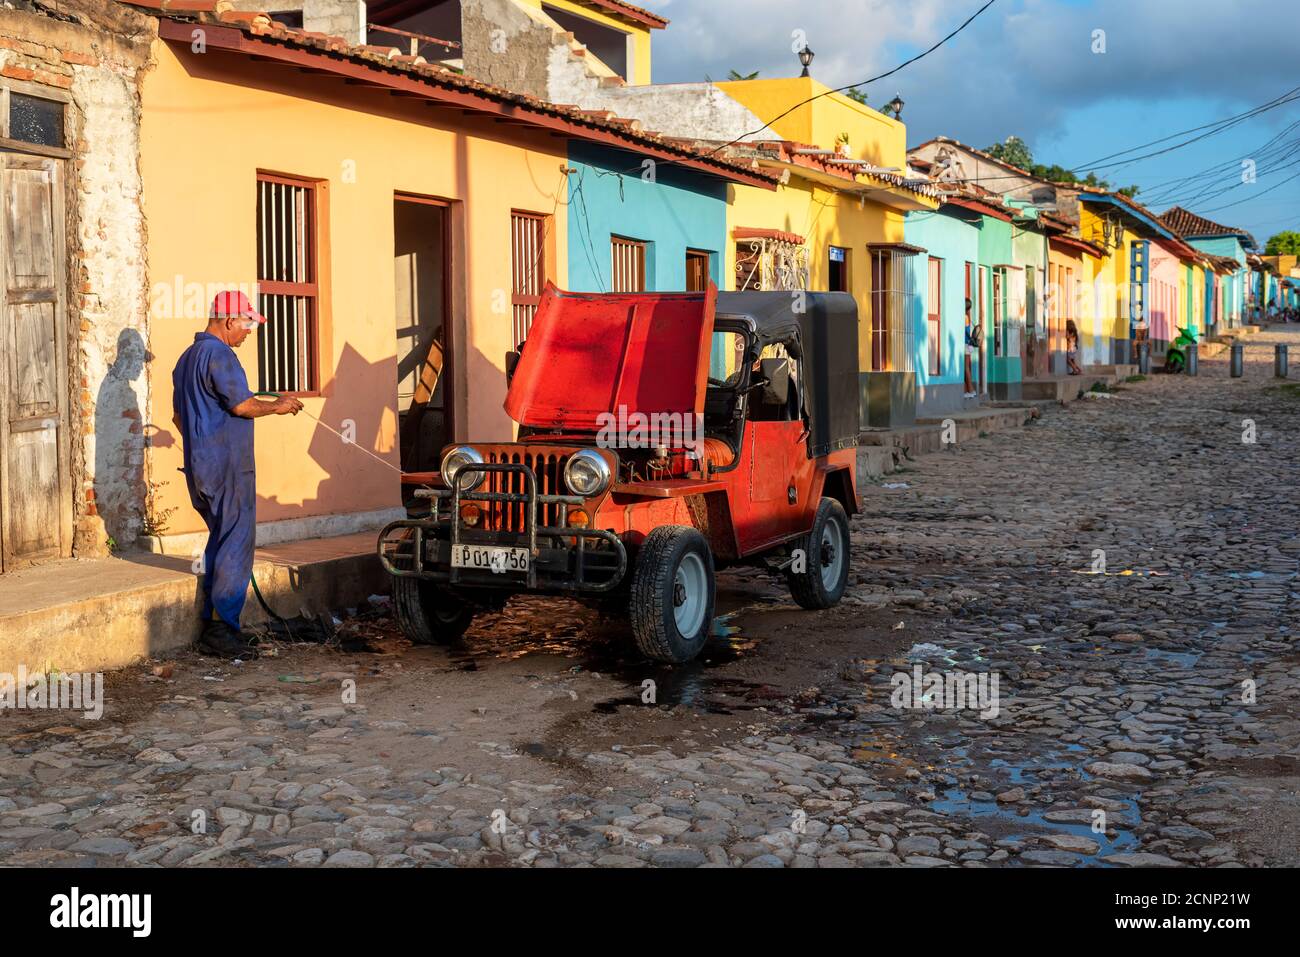 August 24, 2019: Man cleaning old Car. Trinidad, Cuba Stock Photo